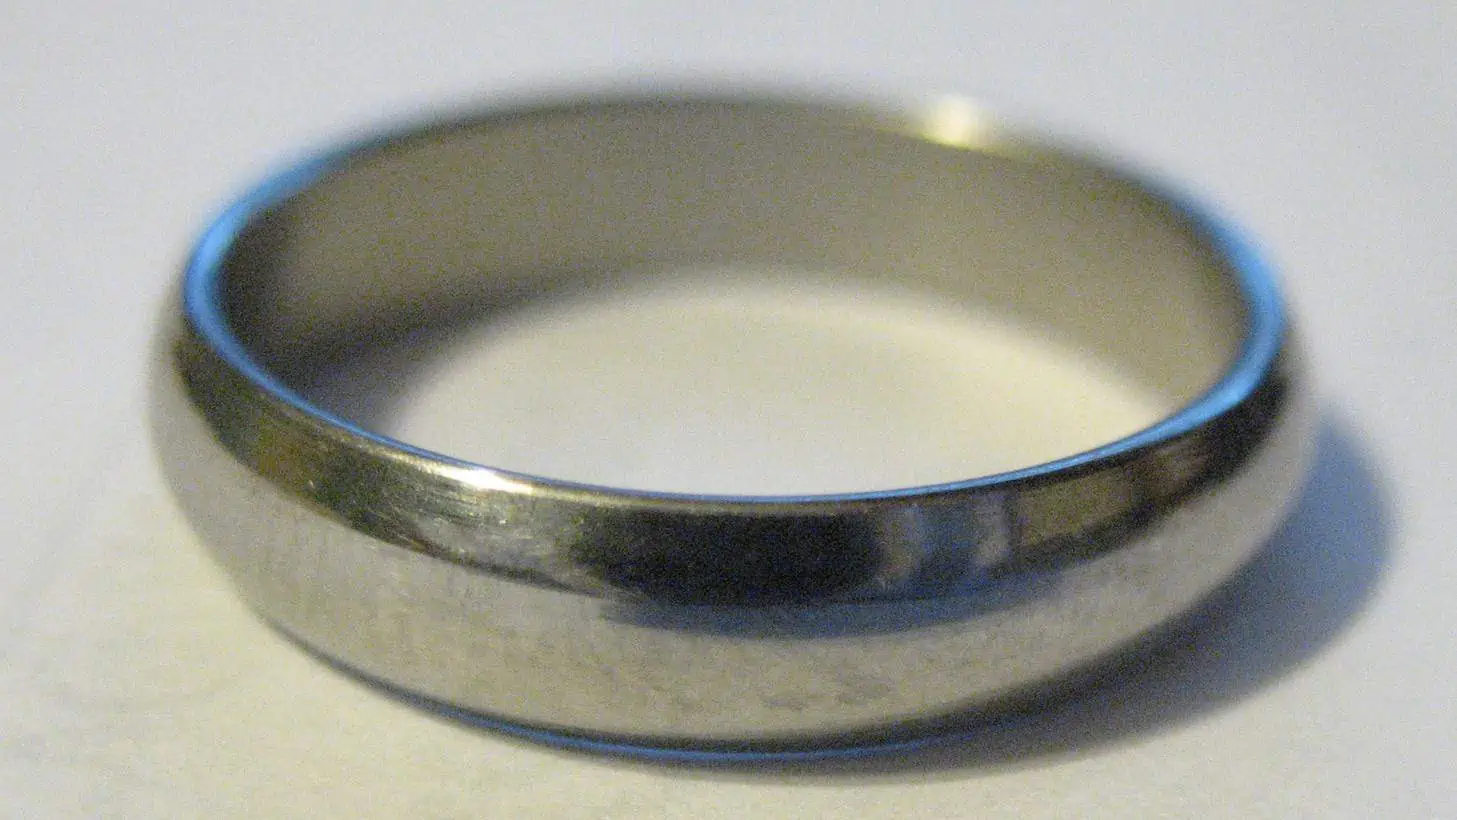 A large silver ring with no decoration